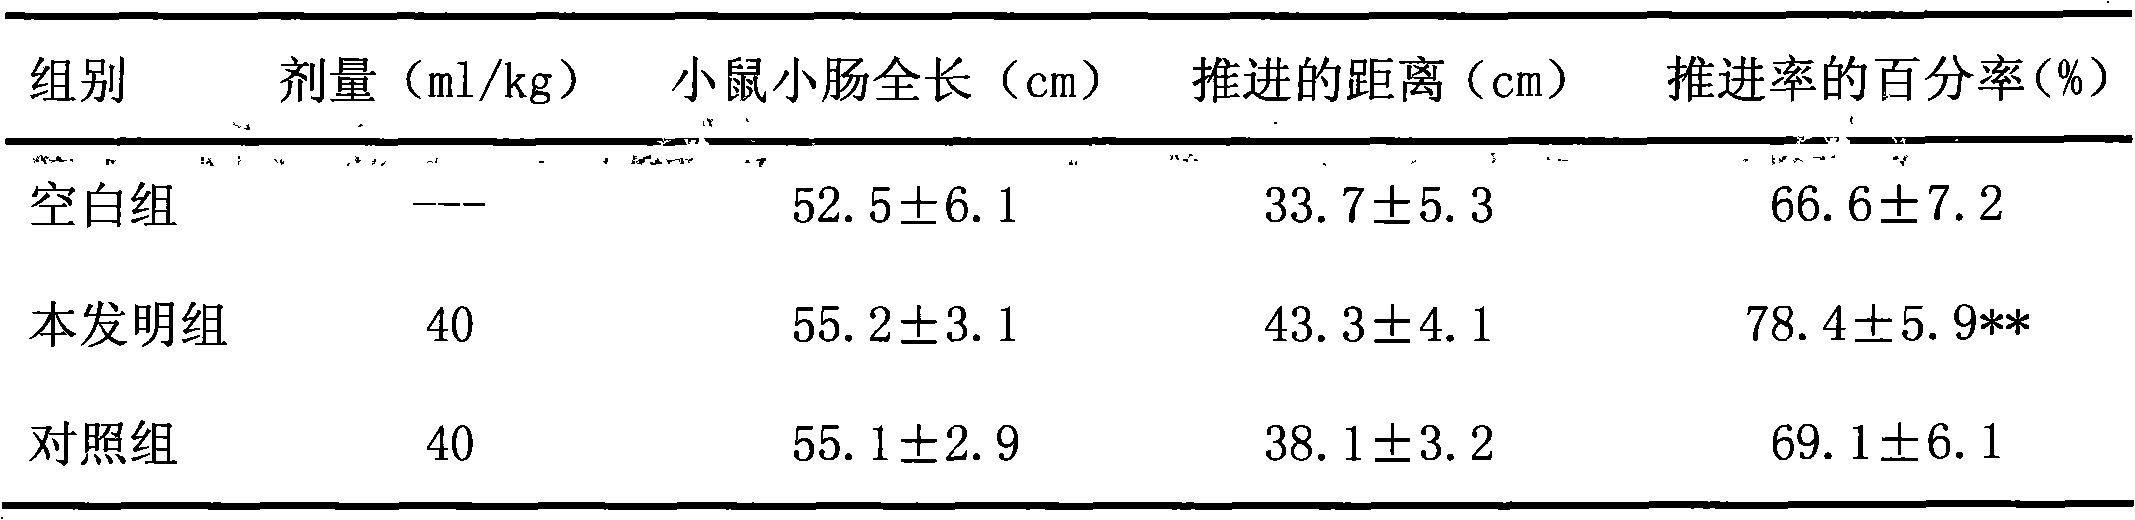 Method for preparing Chinese medicinal composition for treating child dyspepsia caused by overeating